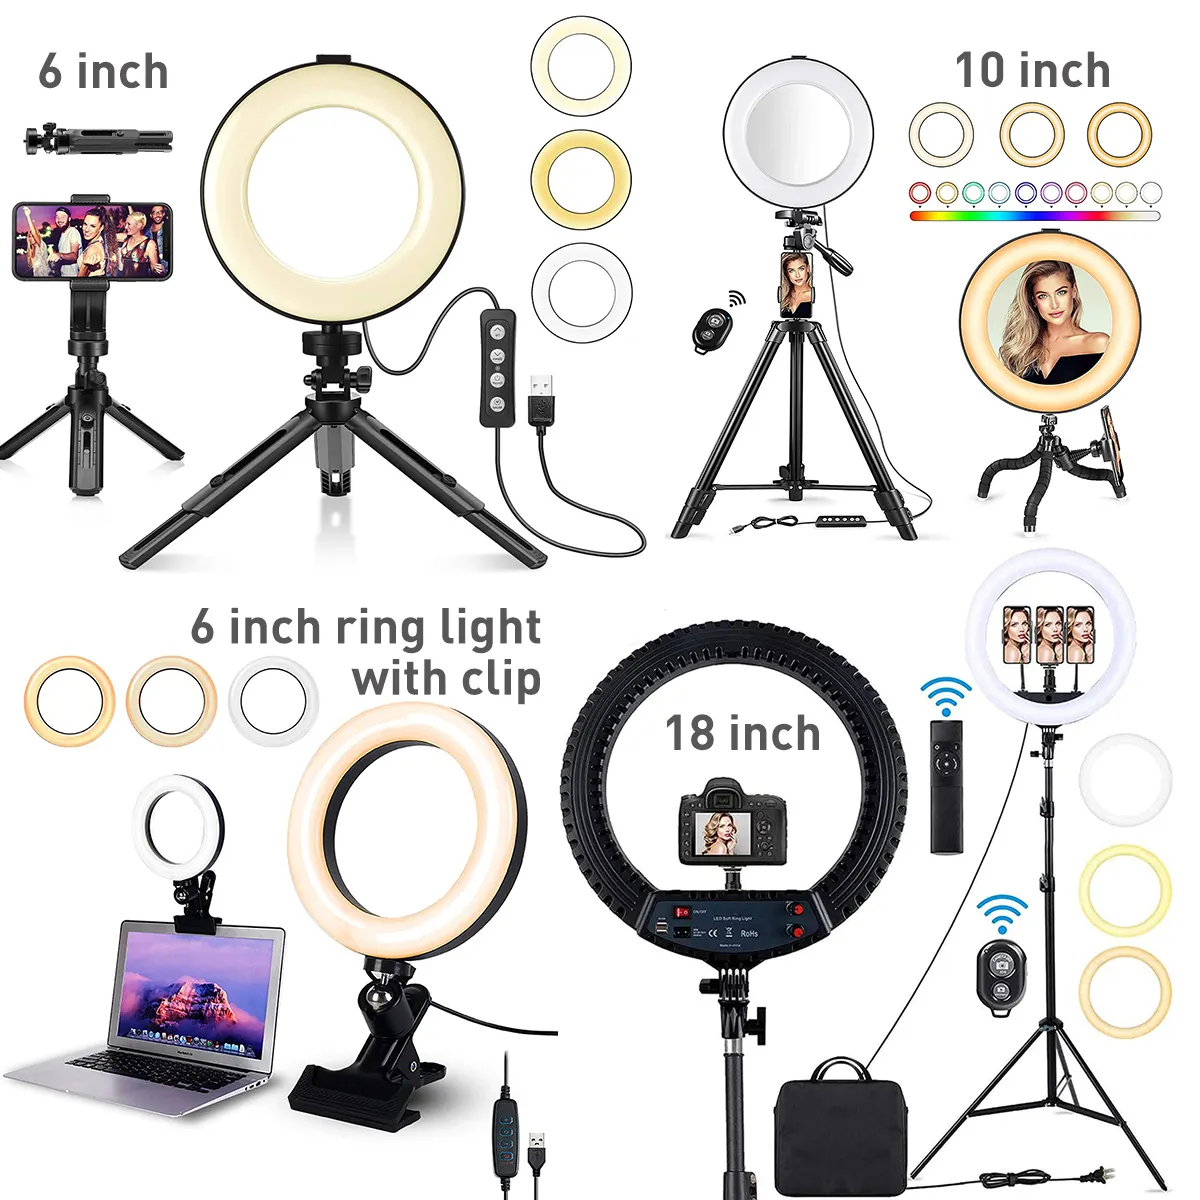 10 Inch 26 Cm Beauty Selfie Photography Photo Ring light Led Lamp Fill Light Video Camera Makeup Ring Light With Tripod Stand